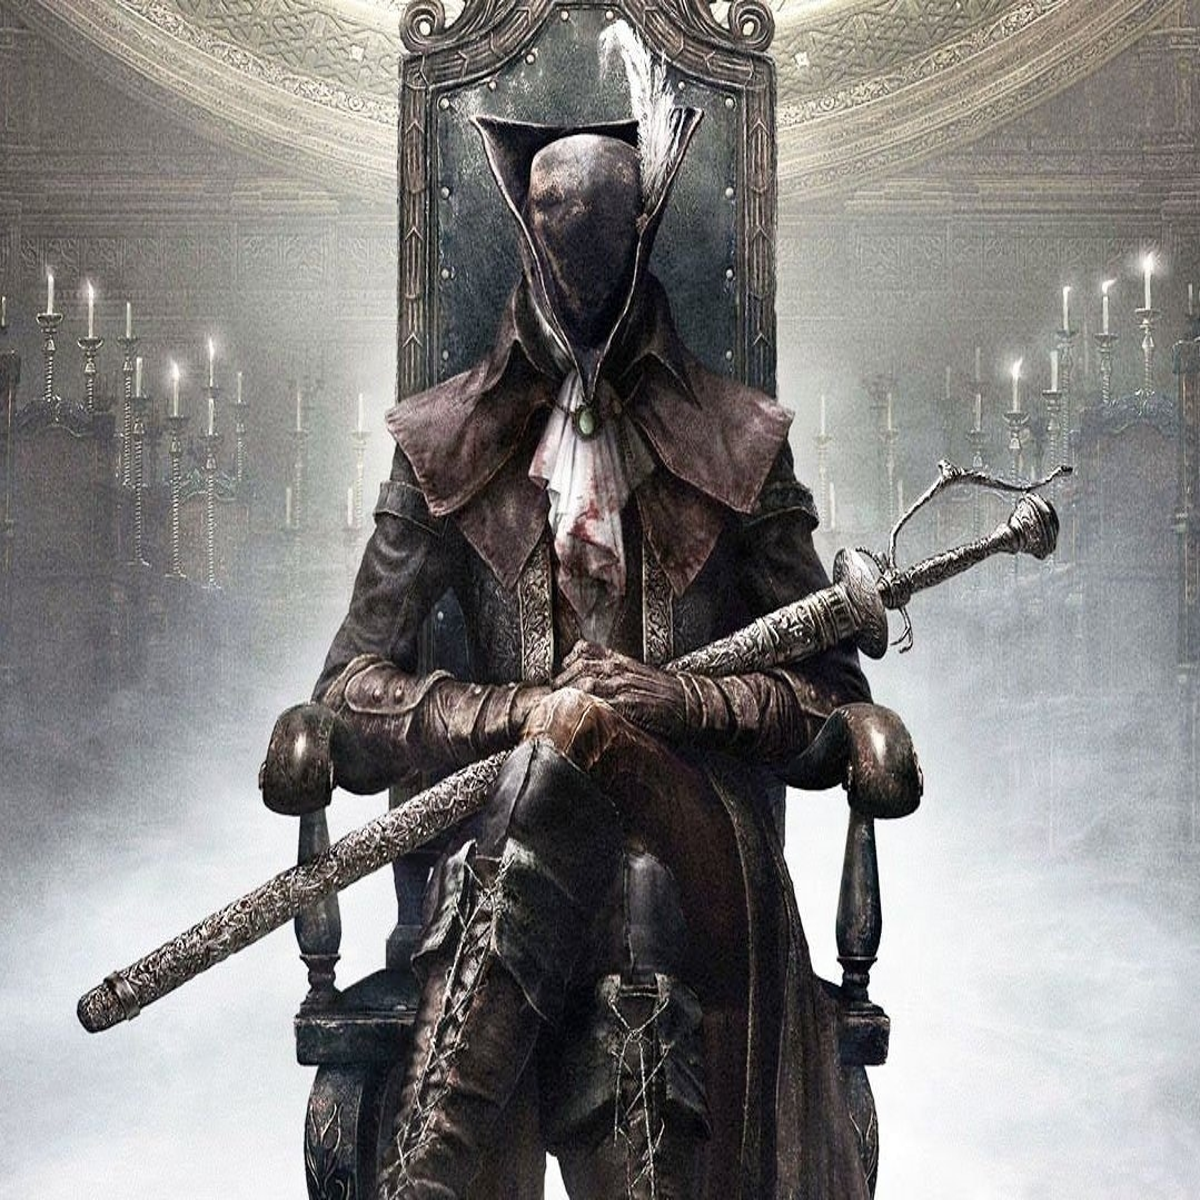 bloodborne-the-old-hunters-walkthrough-and-guide-3689-1446551433654.jpg